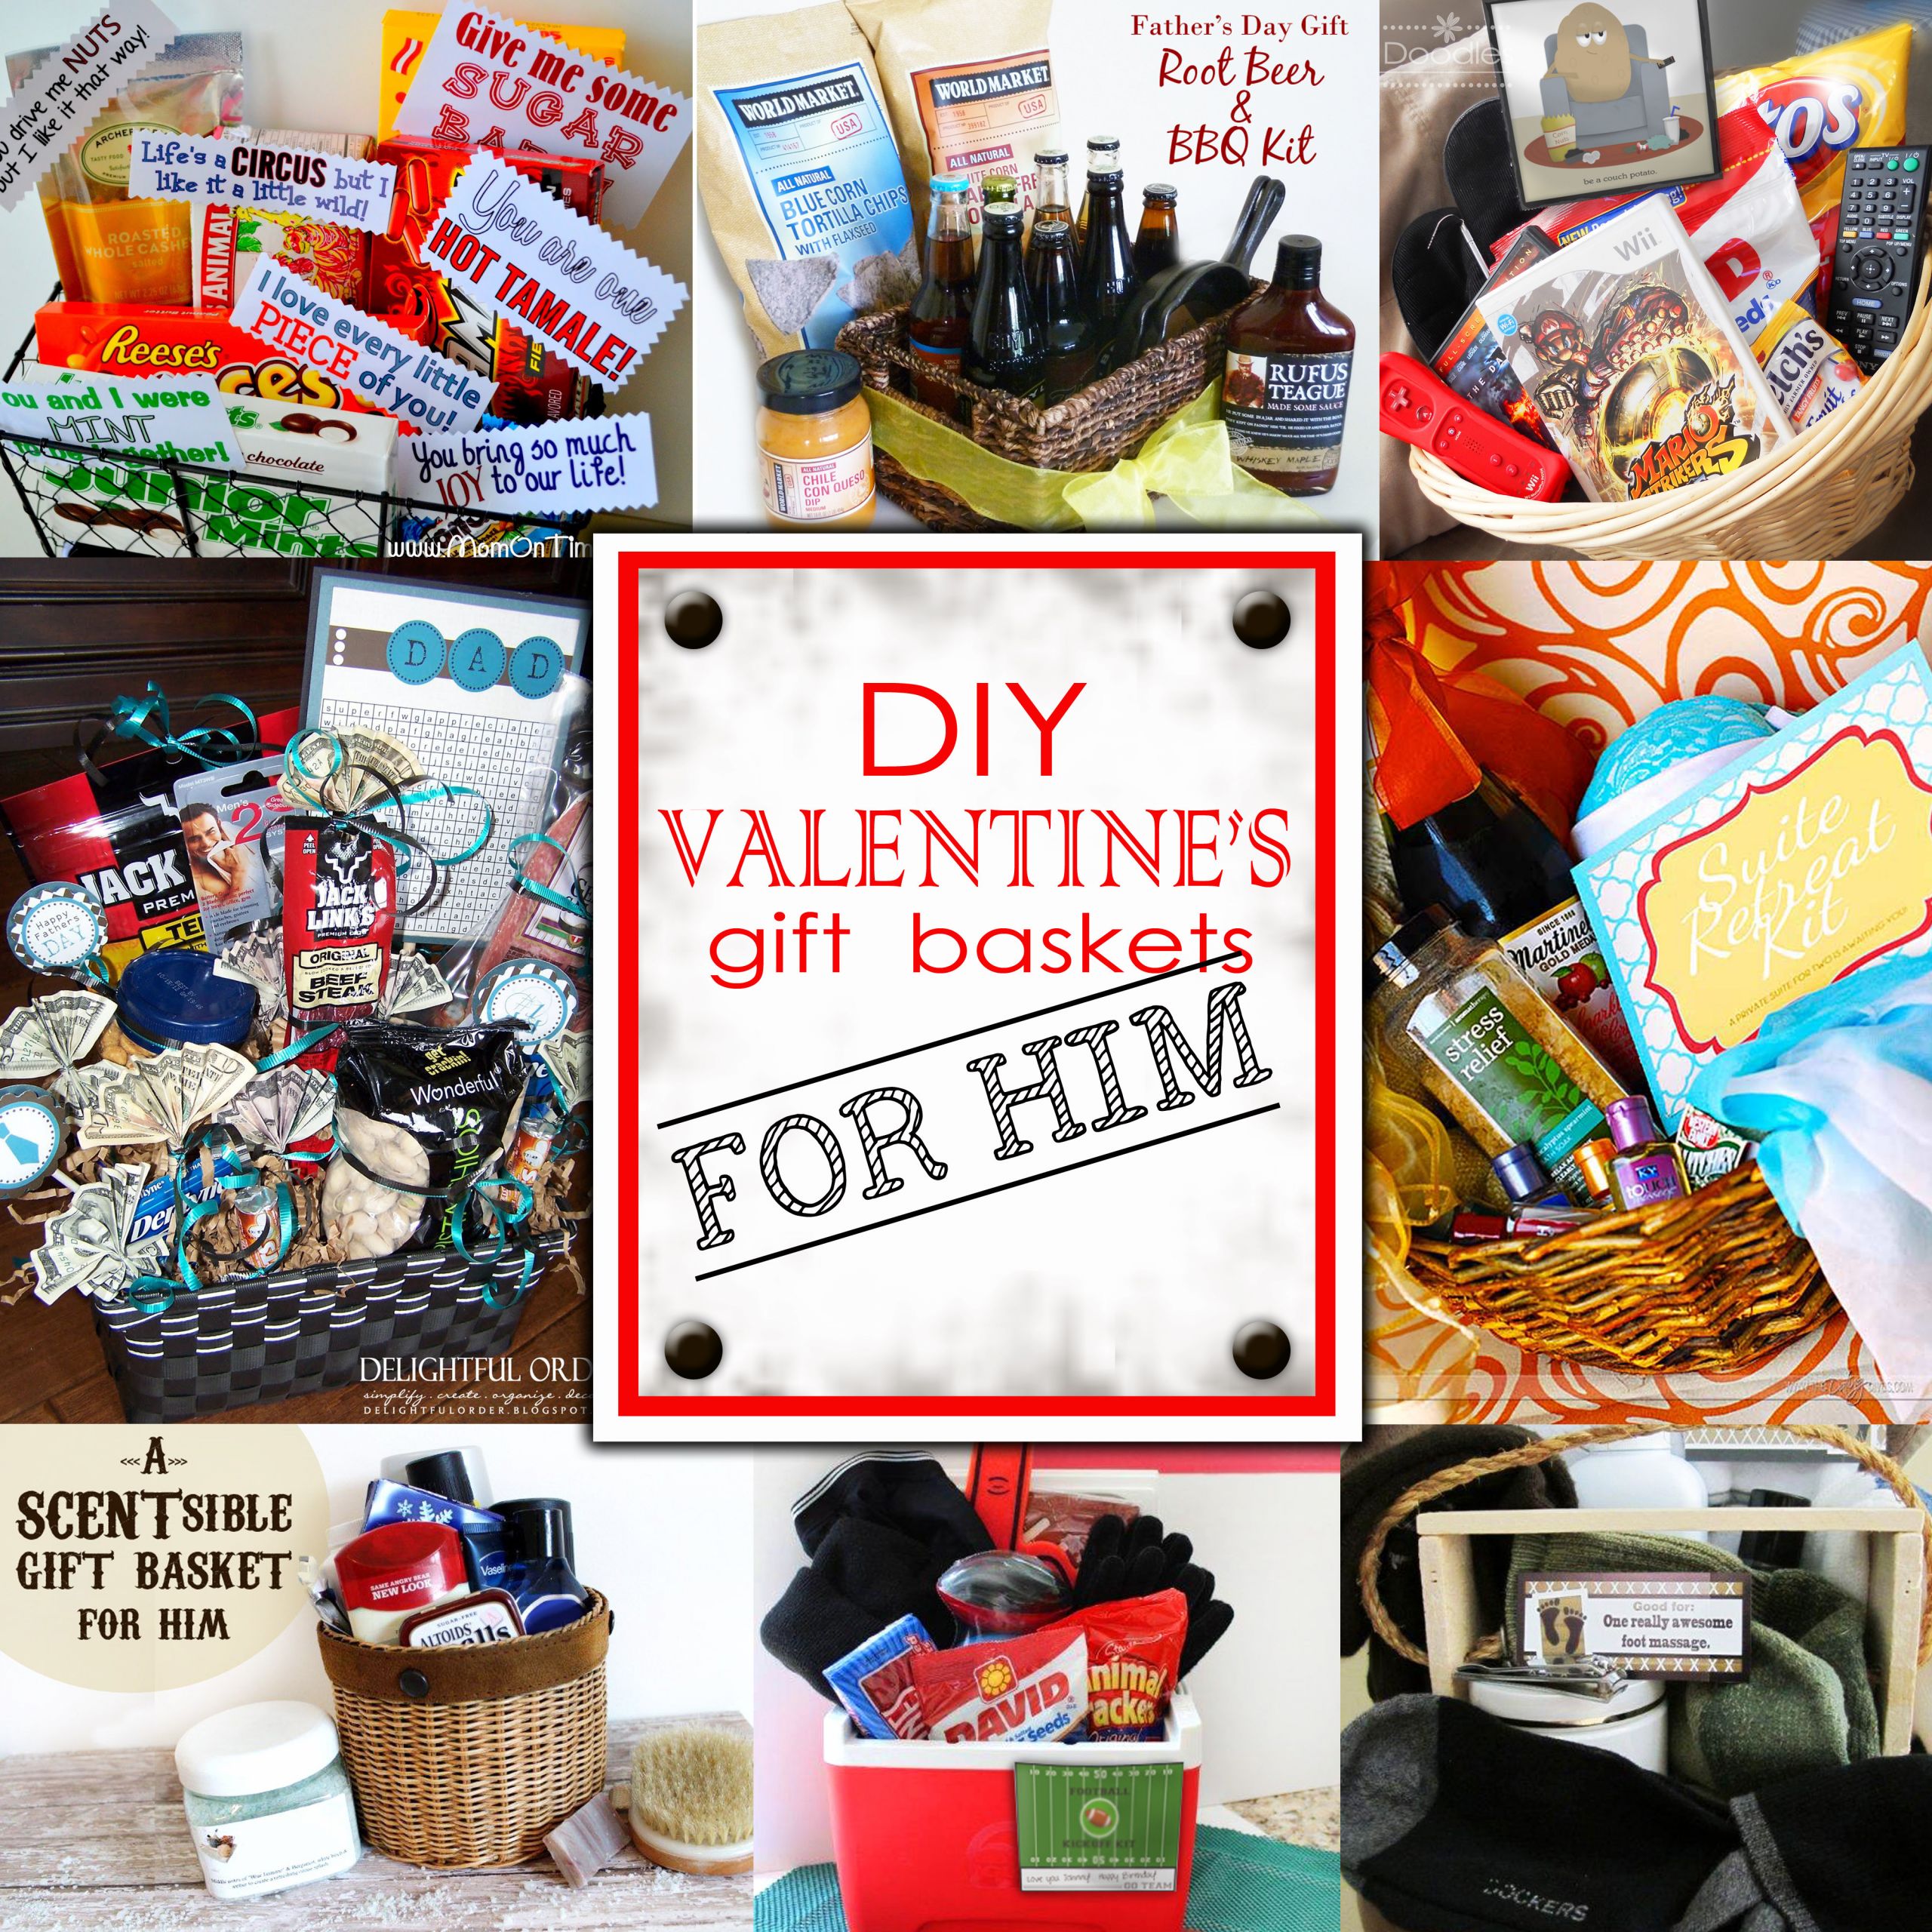 Homemade Valentines Gift Ideas for Him Lovely Diy Valentine S Day Gift Baskets for Him Darling Doodles